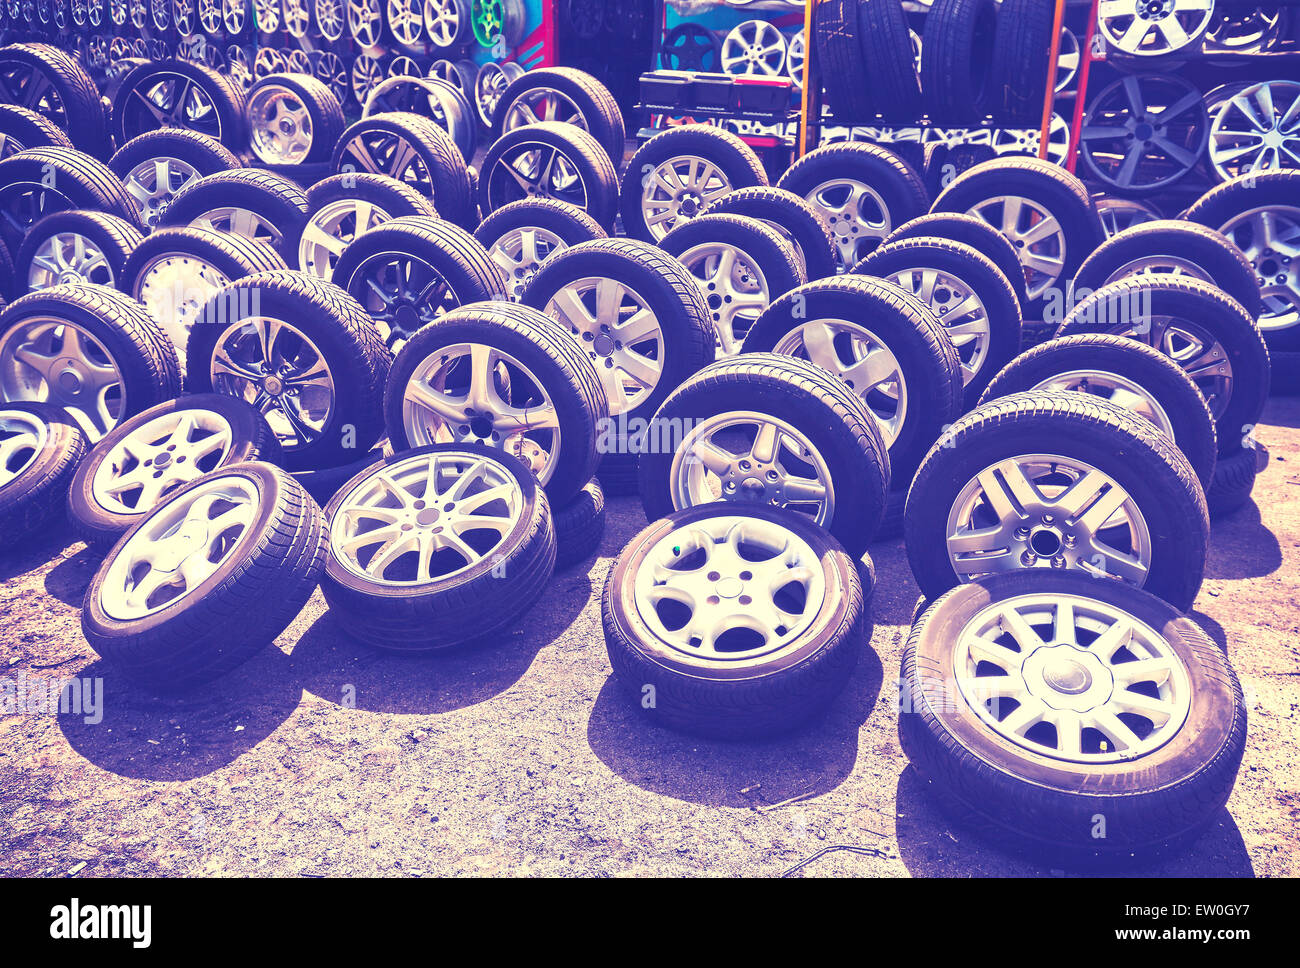 Vintage style picture of car wheels and aluminum rims on the street. Stock Photo